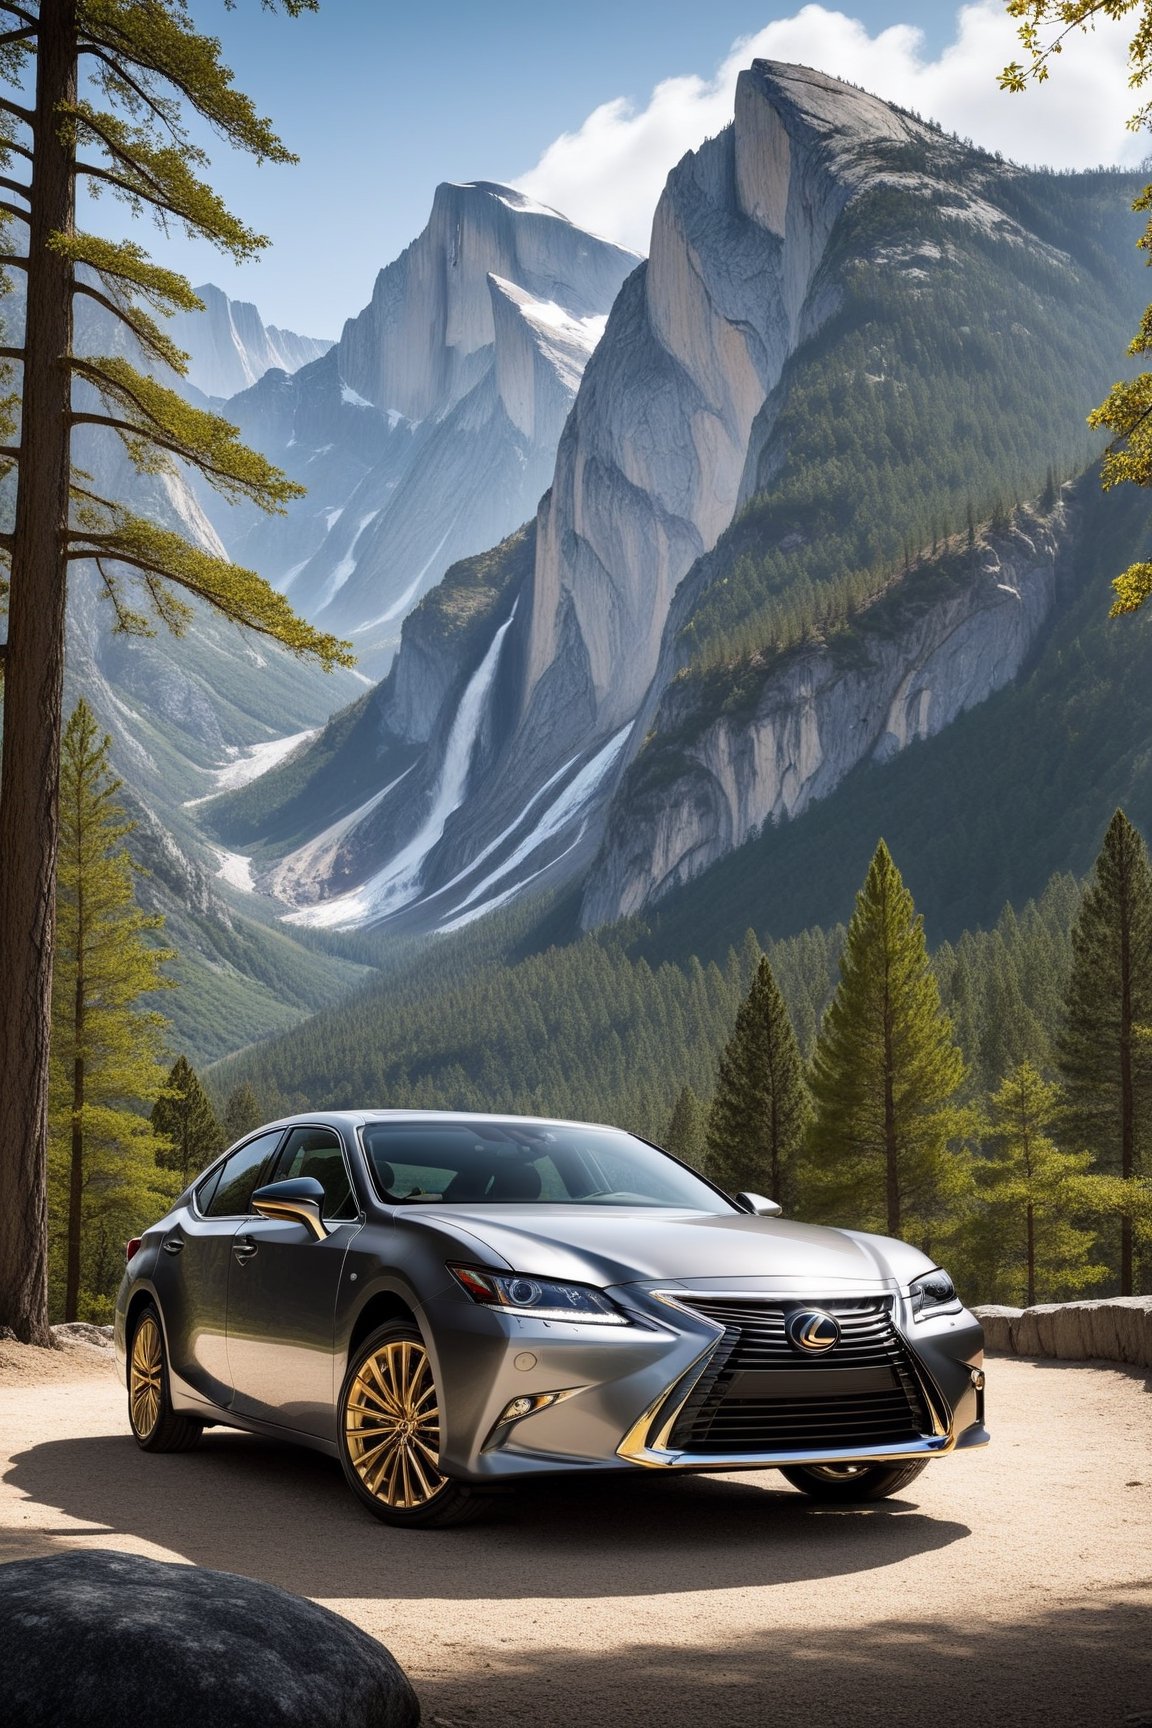 ((Ultra-realistic)) photo of Lexus ES300h,metallic grey color,shiny spinning wheels,glossy gold alloy rims with silver edge,bright turned on head lights
BREAK
(backdrop of yva11ey2,beautiful mountain with rock,tree,forest,vivid colors),depth of perspective,(wide shot),front view
BREAK
sharp focus,high contrast,studio photo,trending on artstation,rule of thirds,perfect composition,Hyper-detailed,masterpiece,best quality,H effect,photo_b00ster, real_booster,more detail XL,y0sem1te,yva11ey2